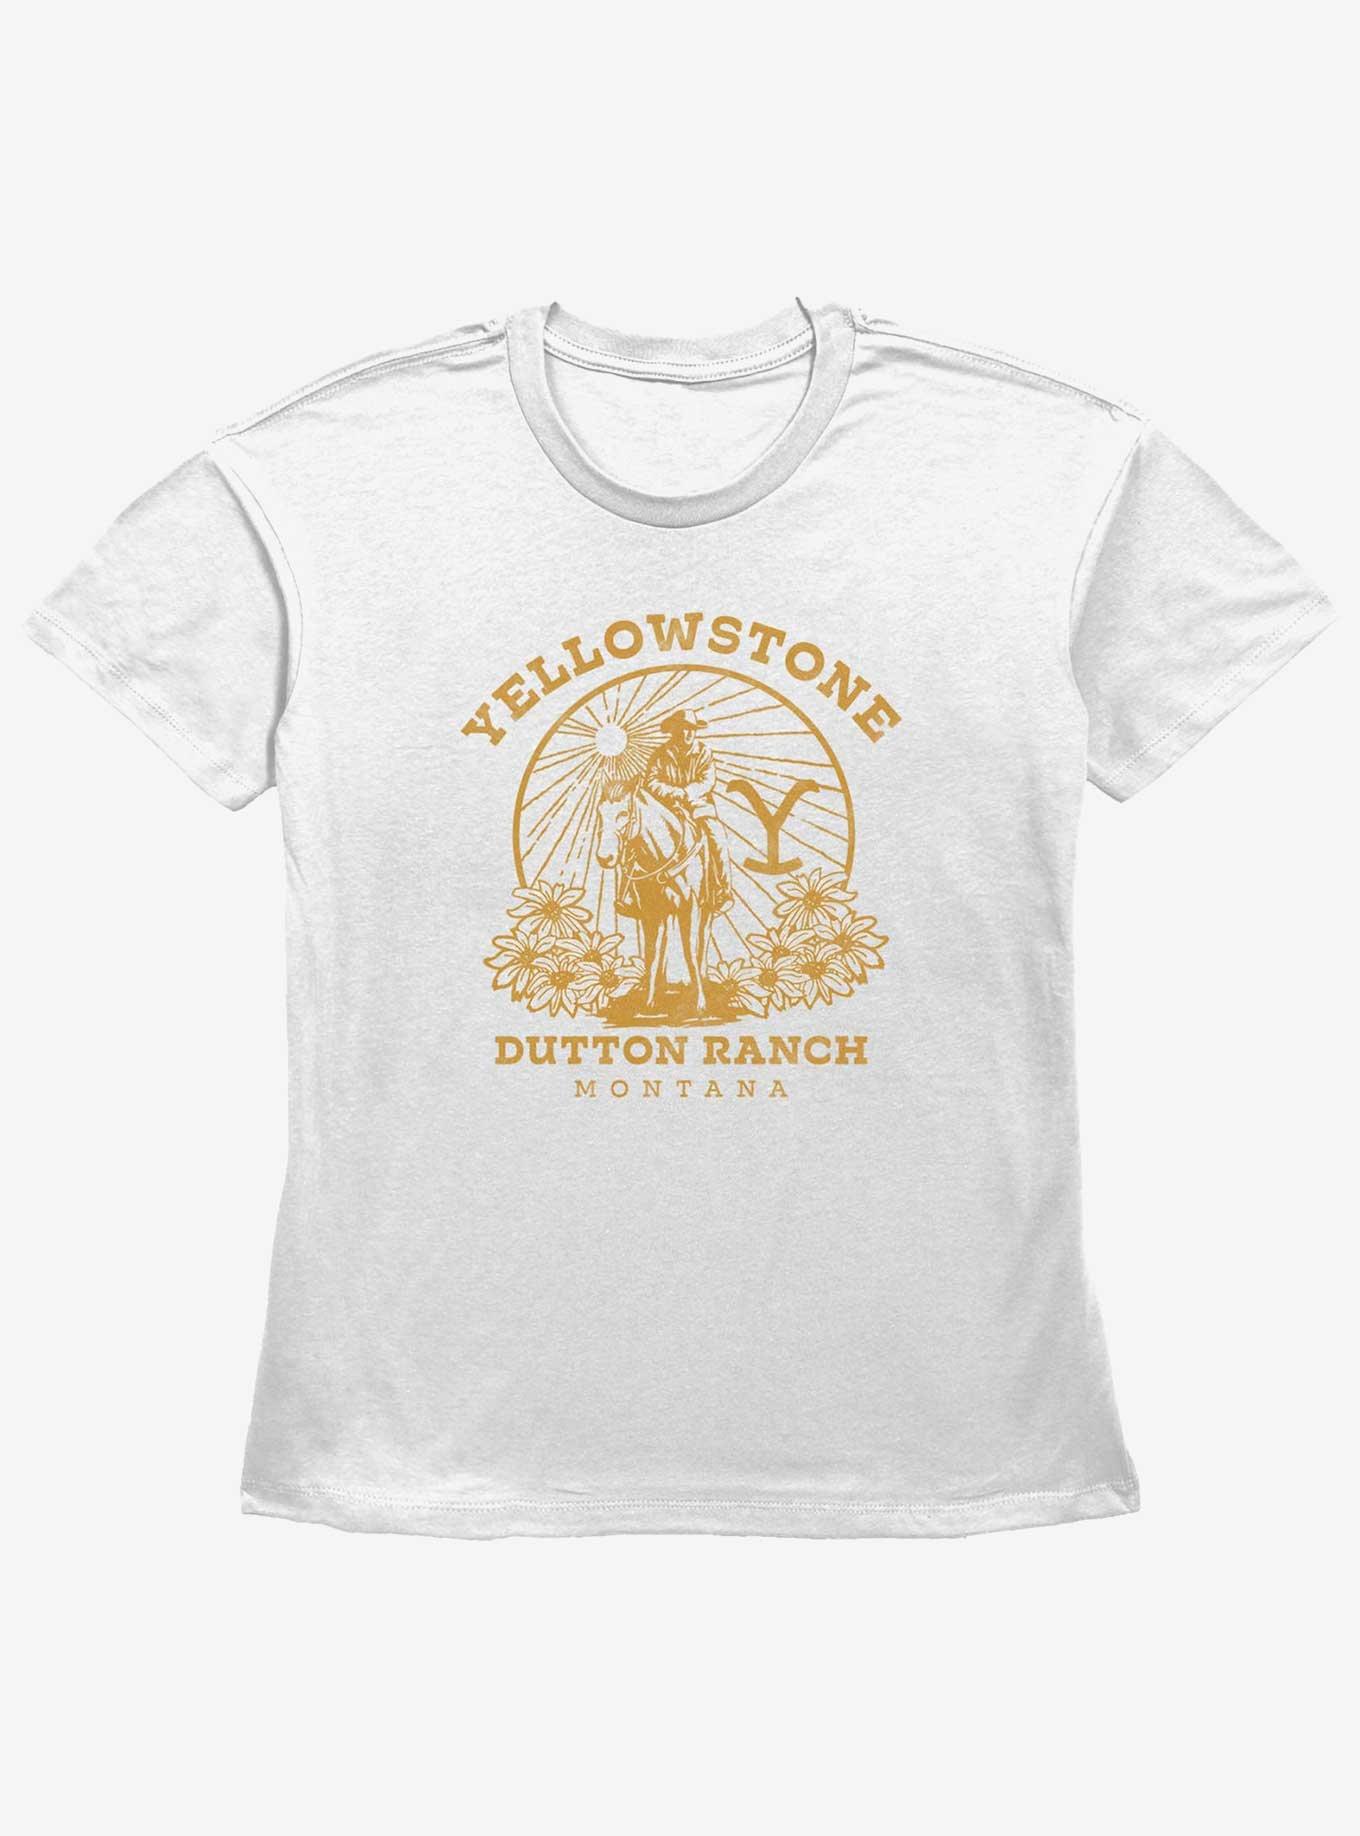 Yellowstone Dutton Ranch Girls Straight Fit T-Shirt, WHITE, hi-res